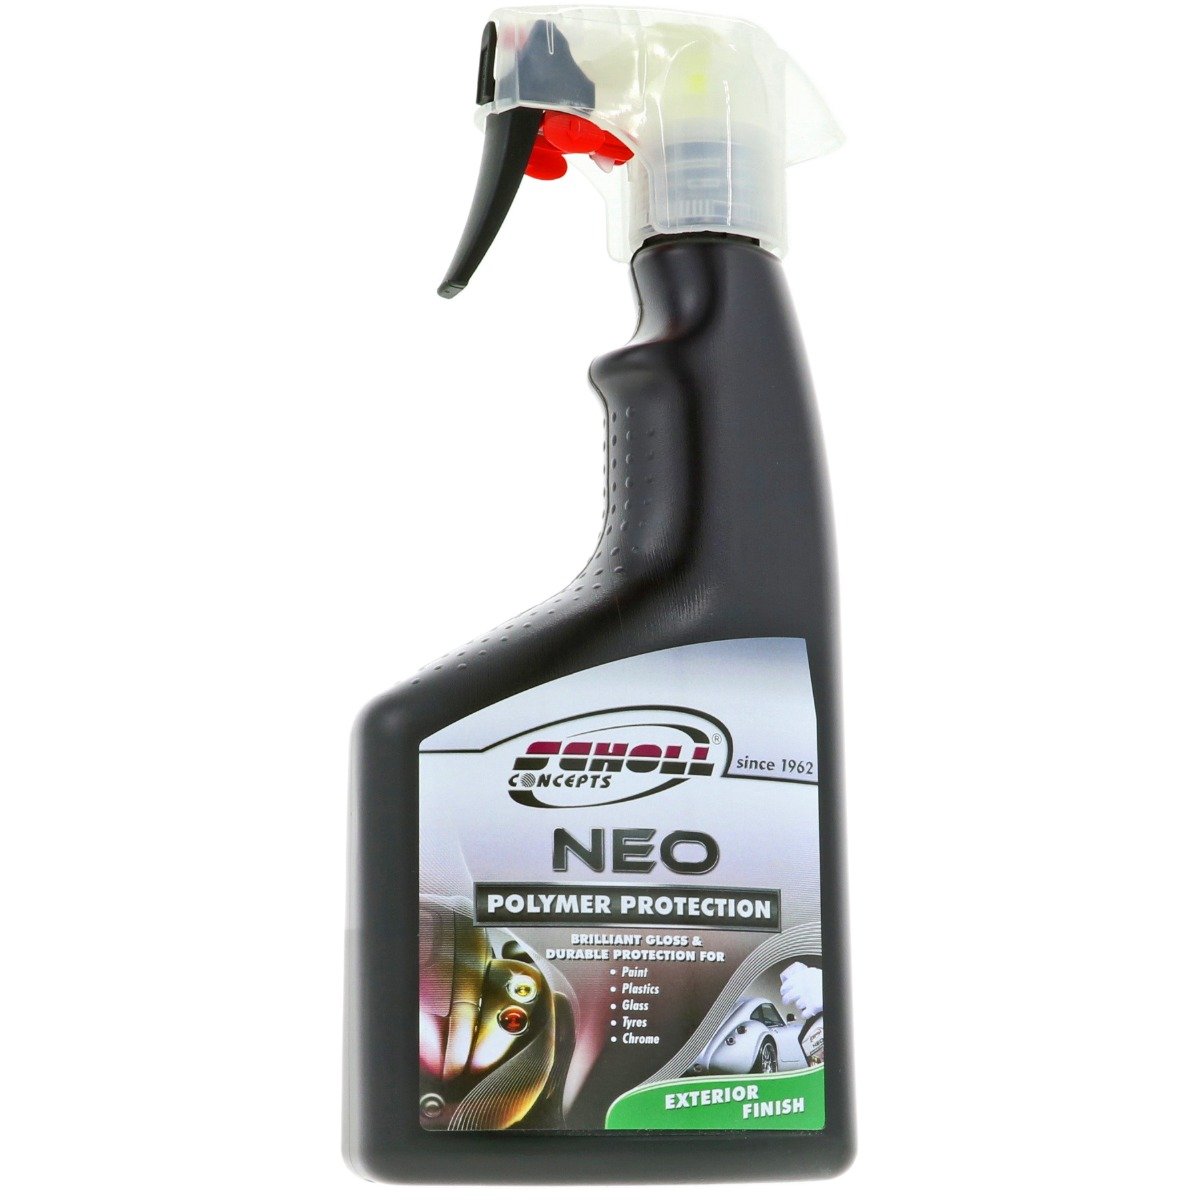 NEO Polymer Protection - 500ml